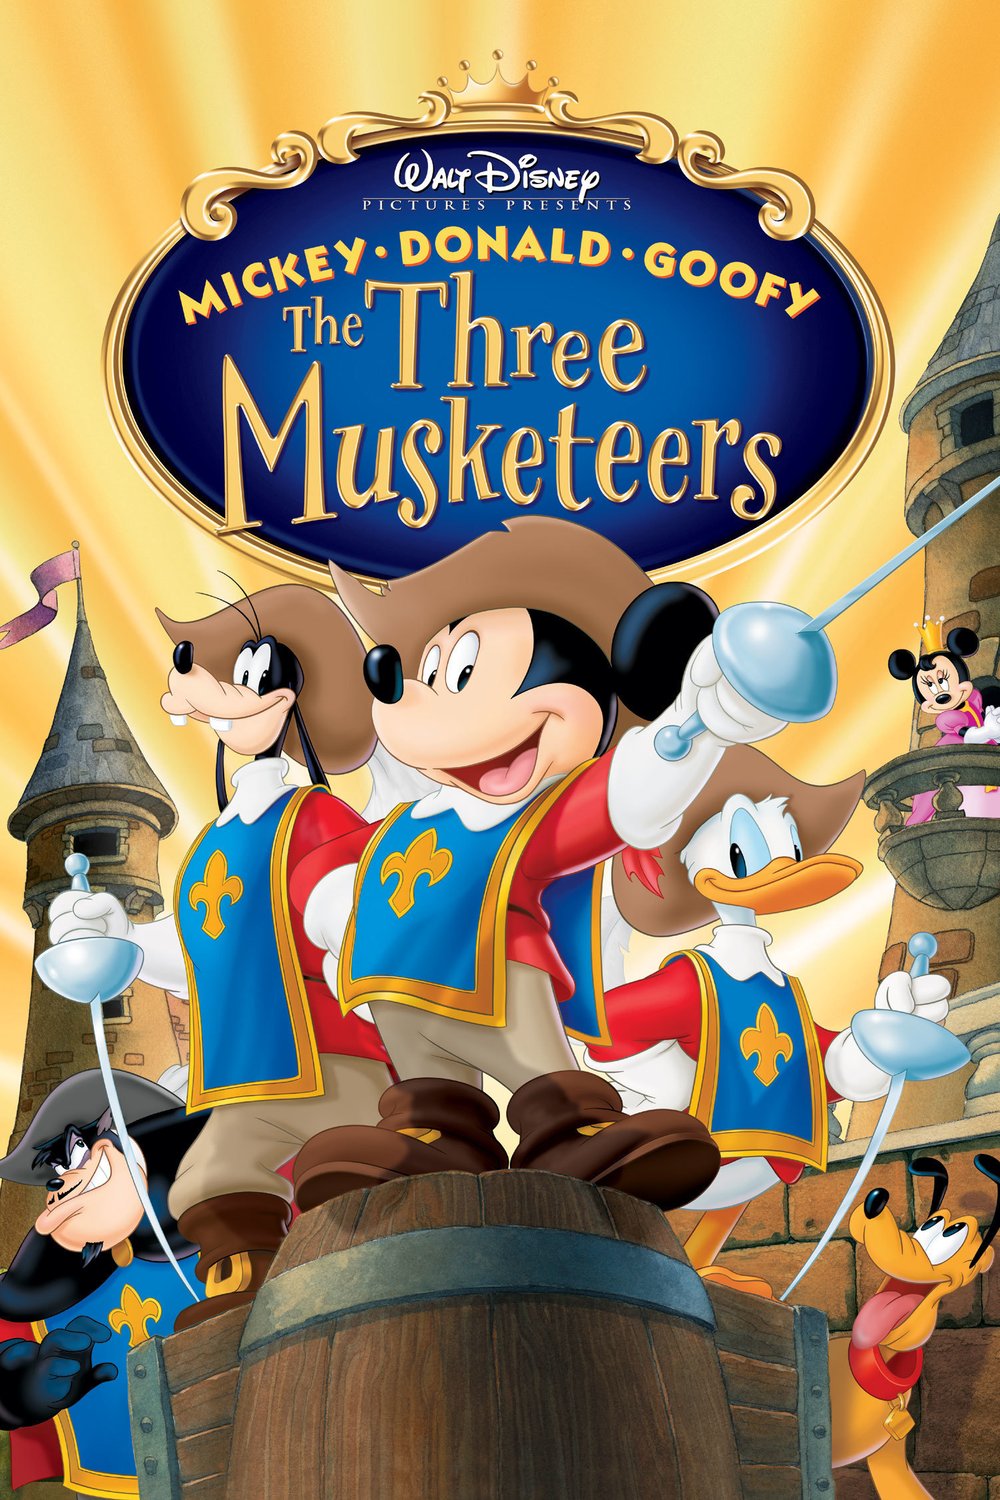 Poster of the movie Mickey, Donald, Goofy: The Three Musketeers